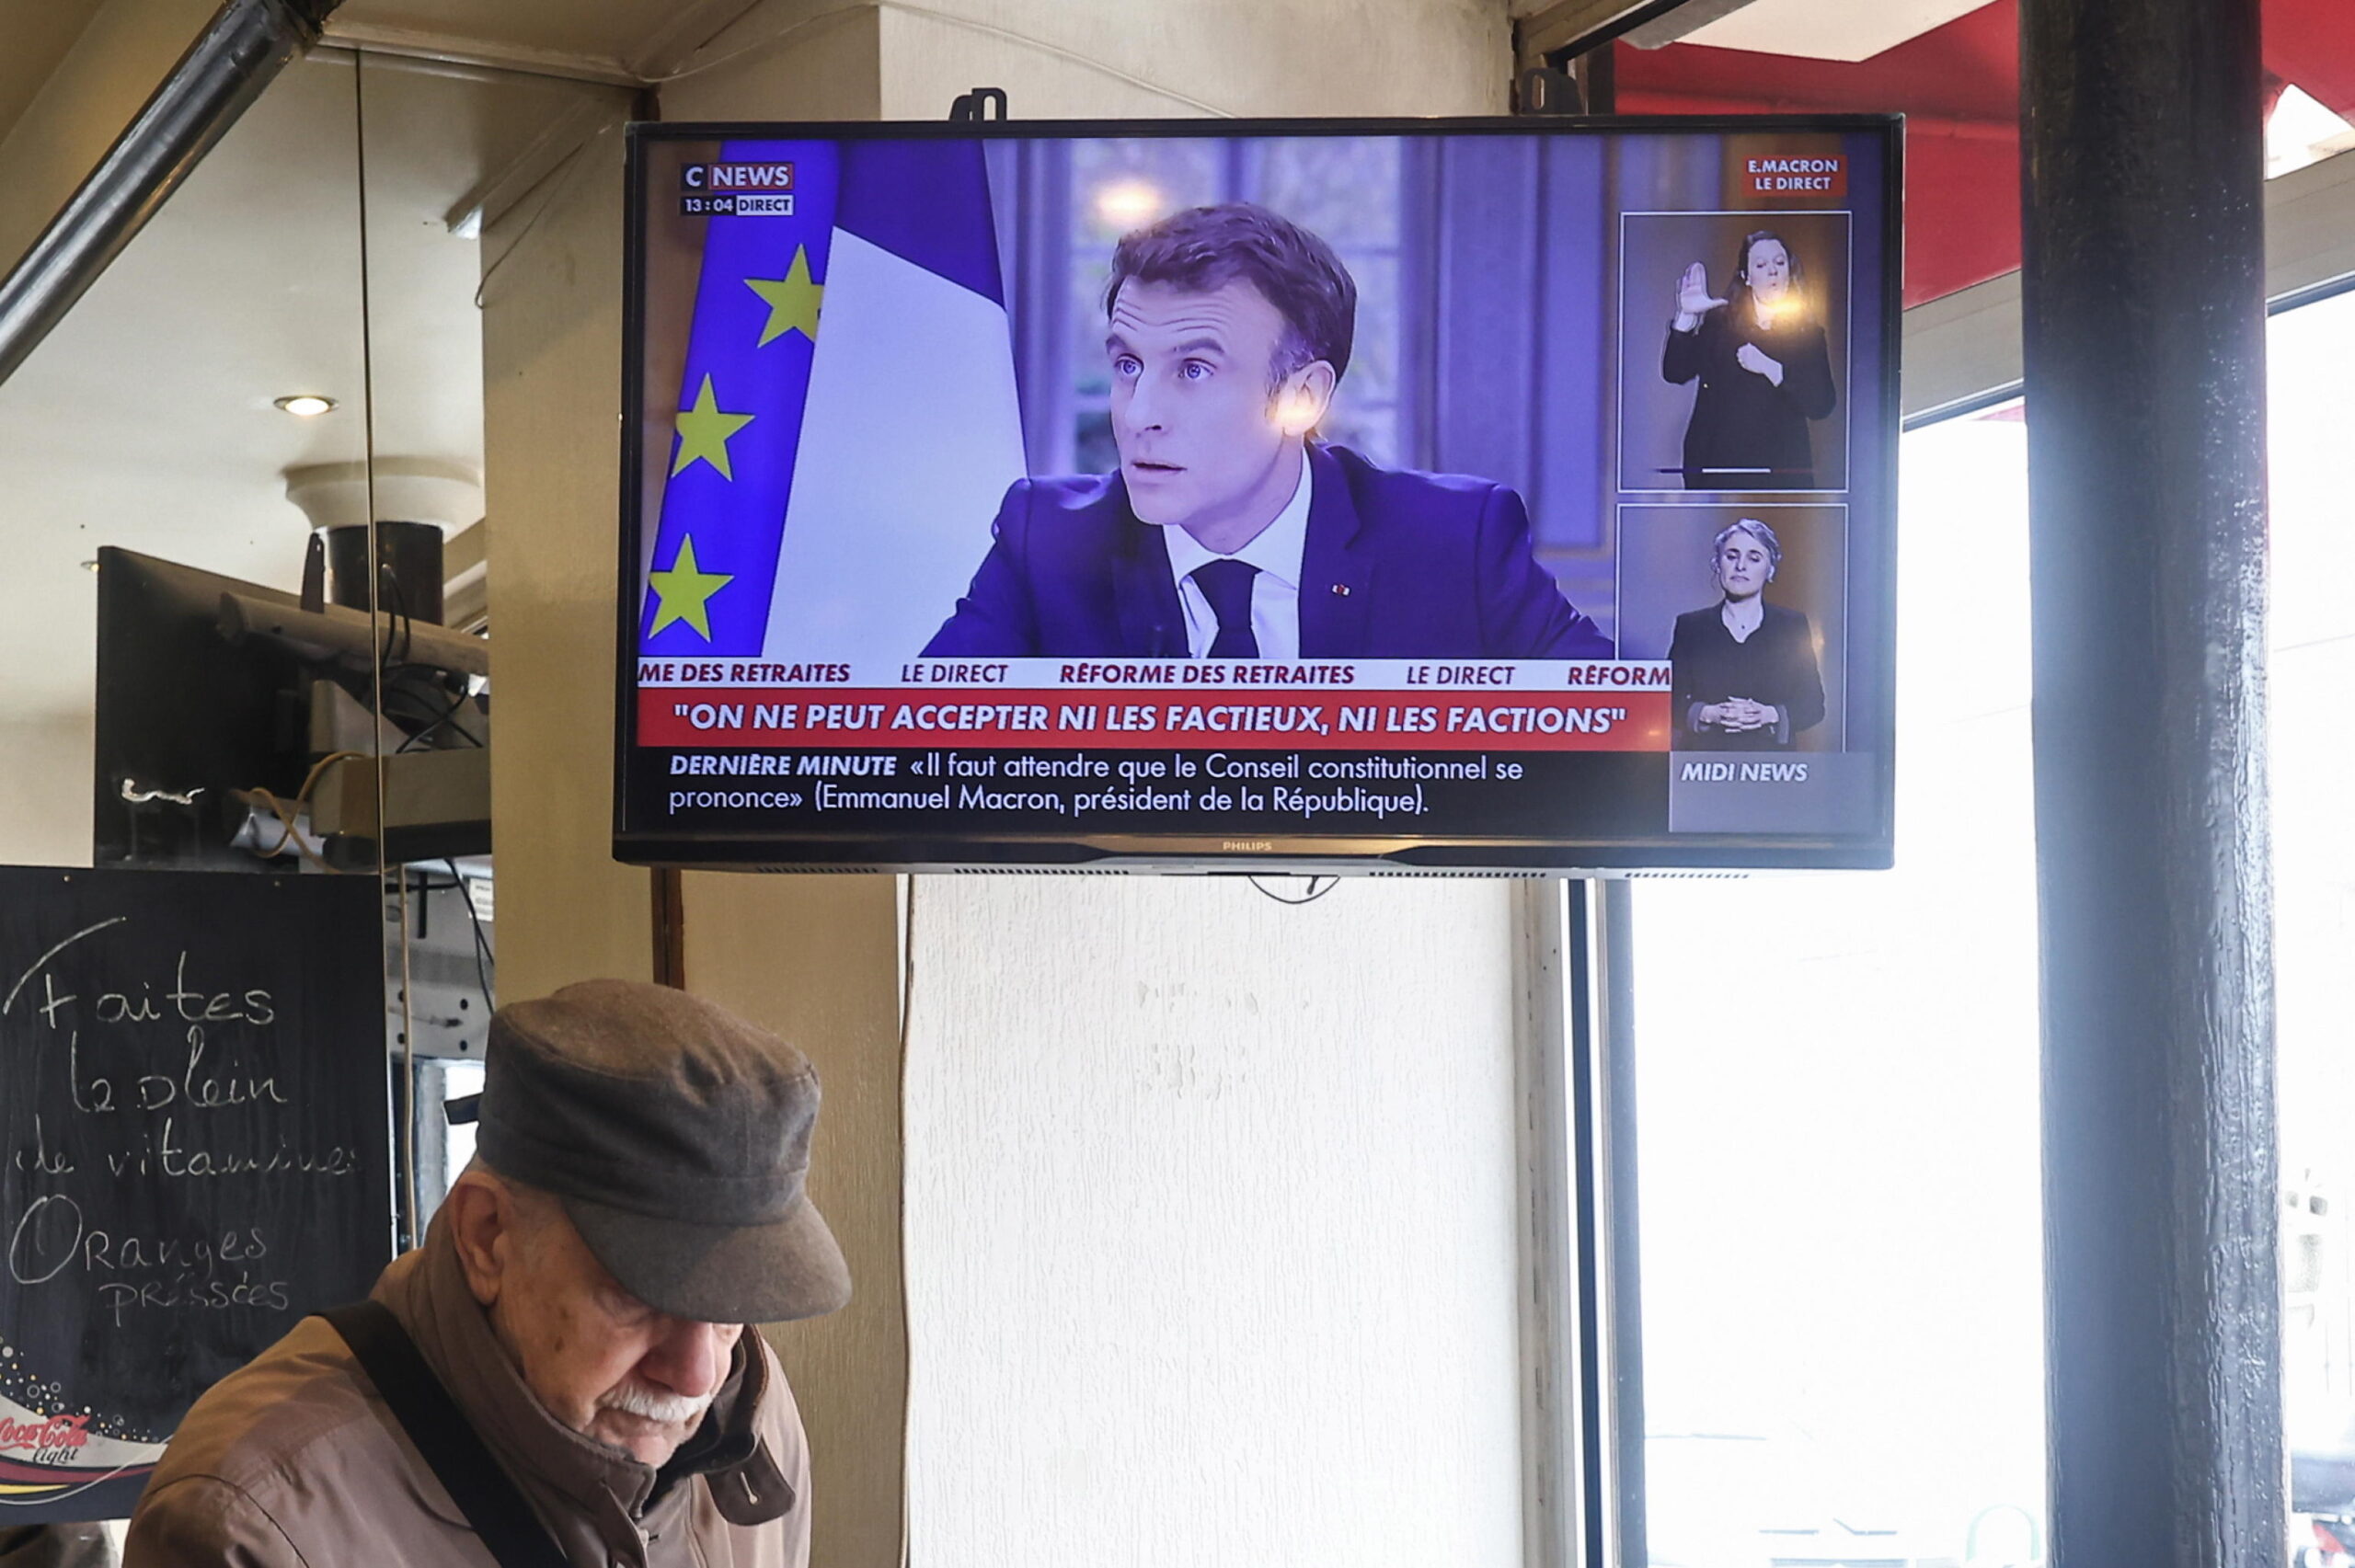 epa10536776 A television in a bar shows the French President Emmanuel Macron's televised interview, in Paris, France, 22 March 2023. Macron used the interview to defend his decision to raise the pension age from 62 to 64.  EPA/Mohammed Badra